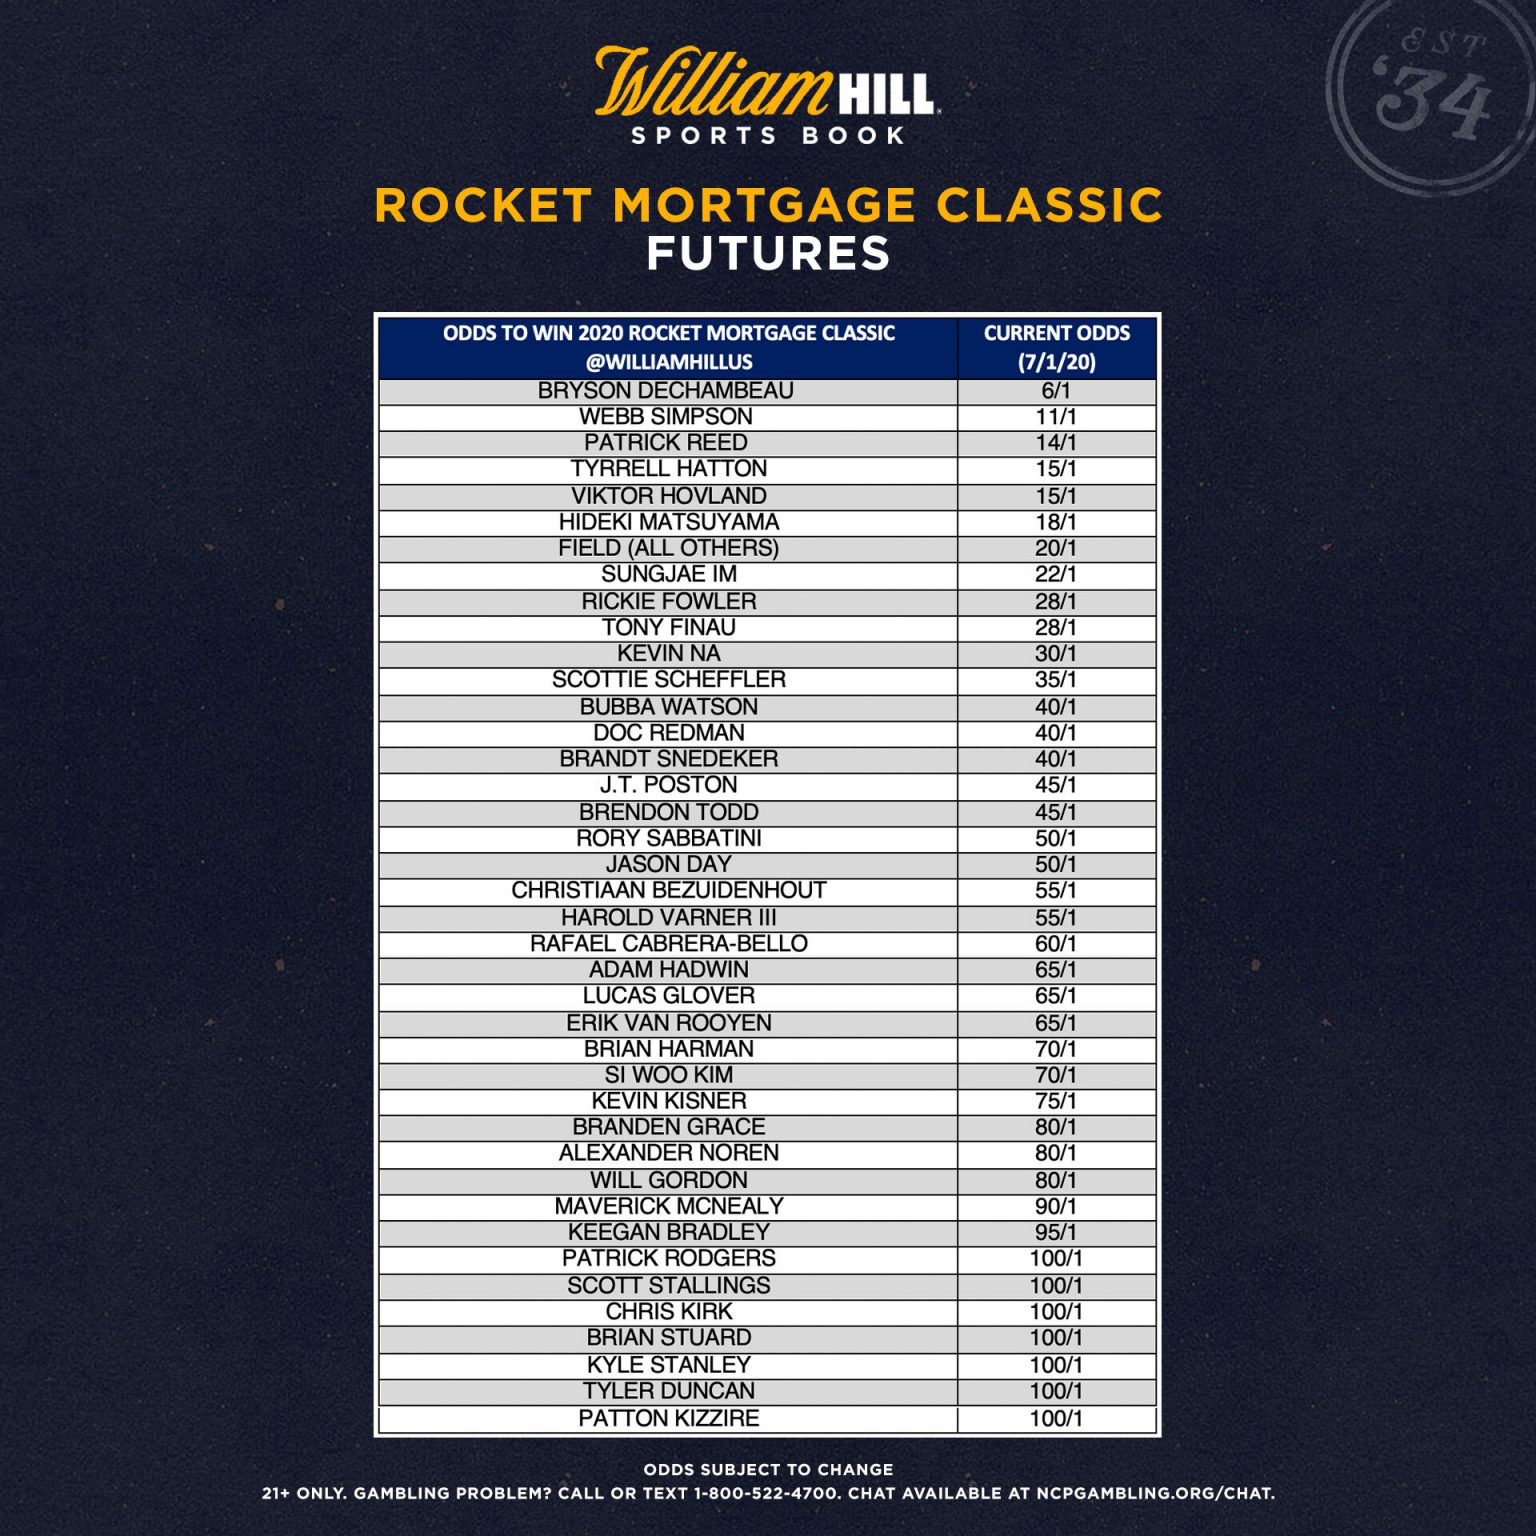 2020 Rocket Mortgage Classic Odds, Notable Shifts, Biggest Bets, More